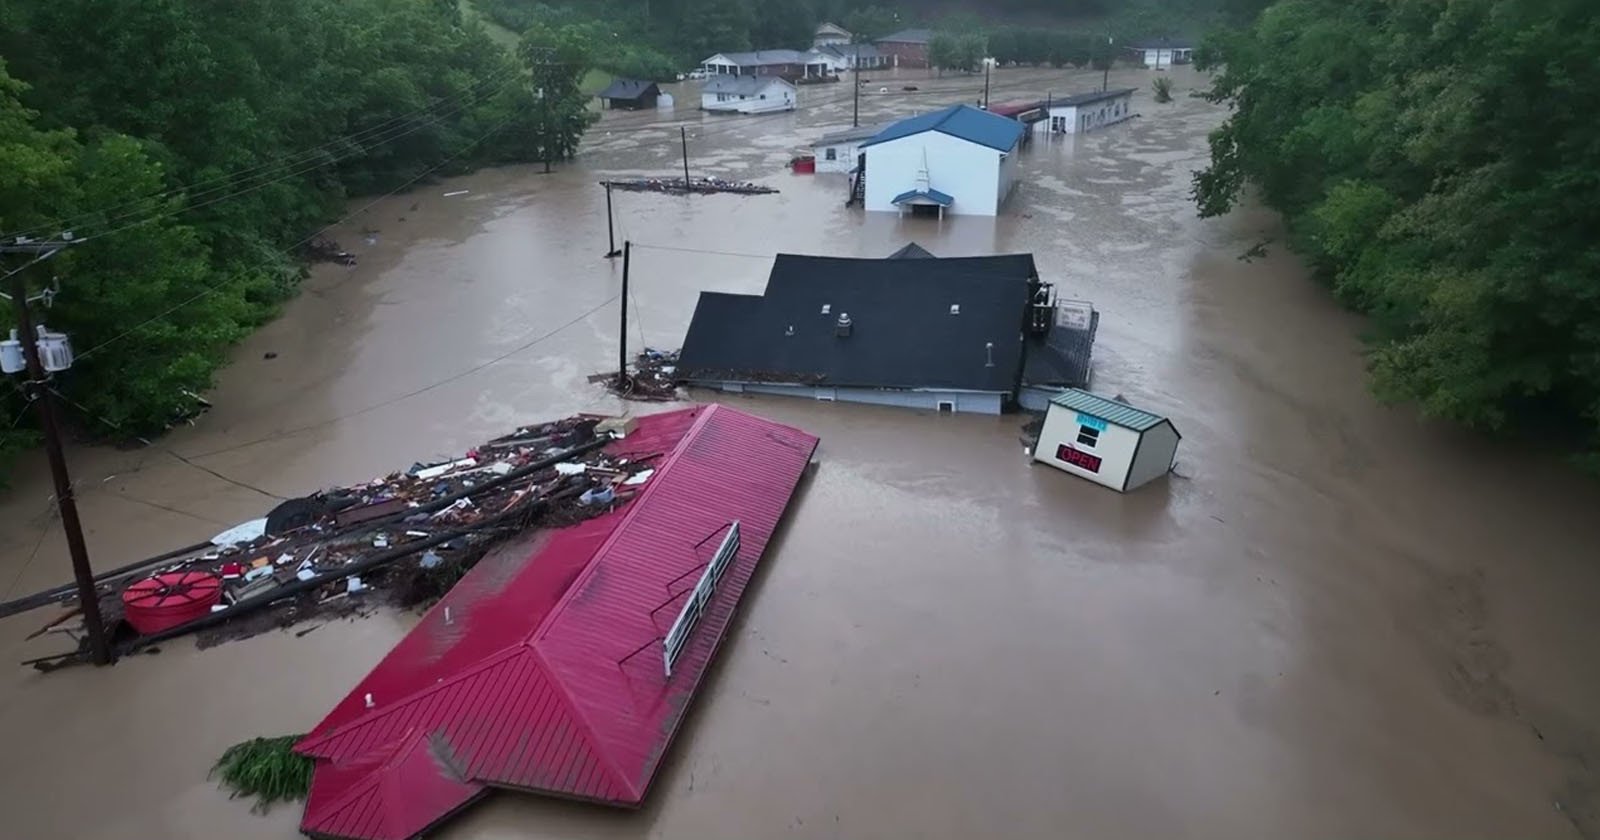 Drone Footage Shows the Extent of the Devastating Floods in Kentucky